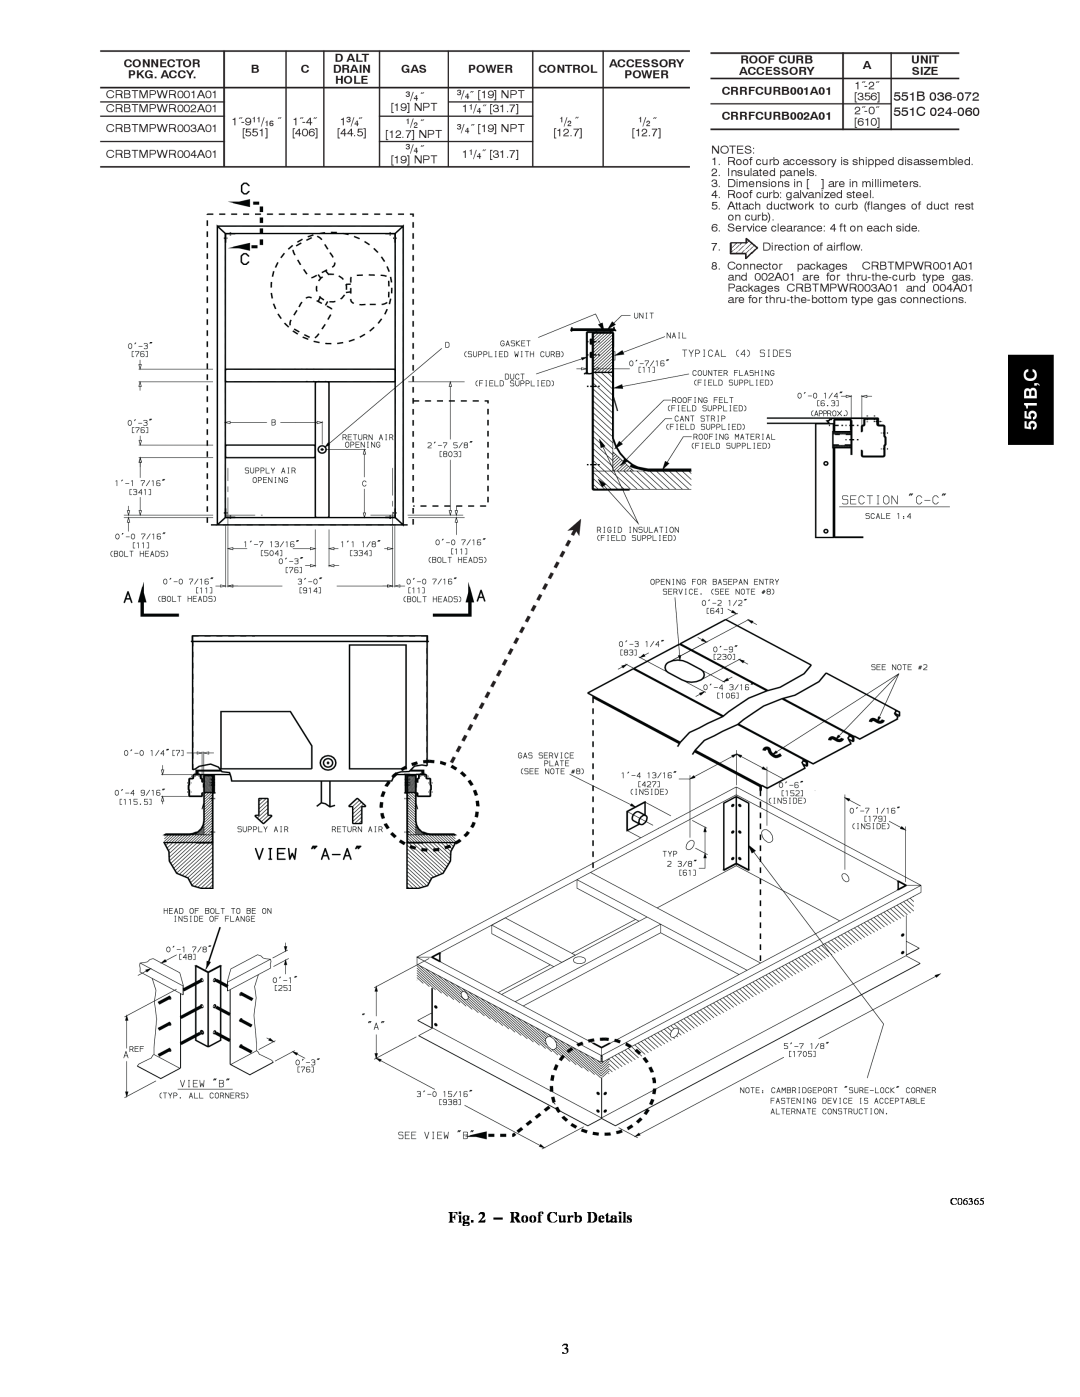 Bryant 551C installation instructions 551B,C, Roof Curb Details 